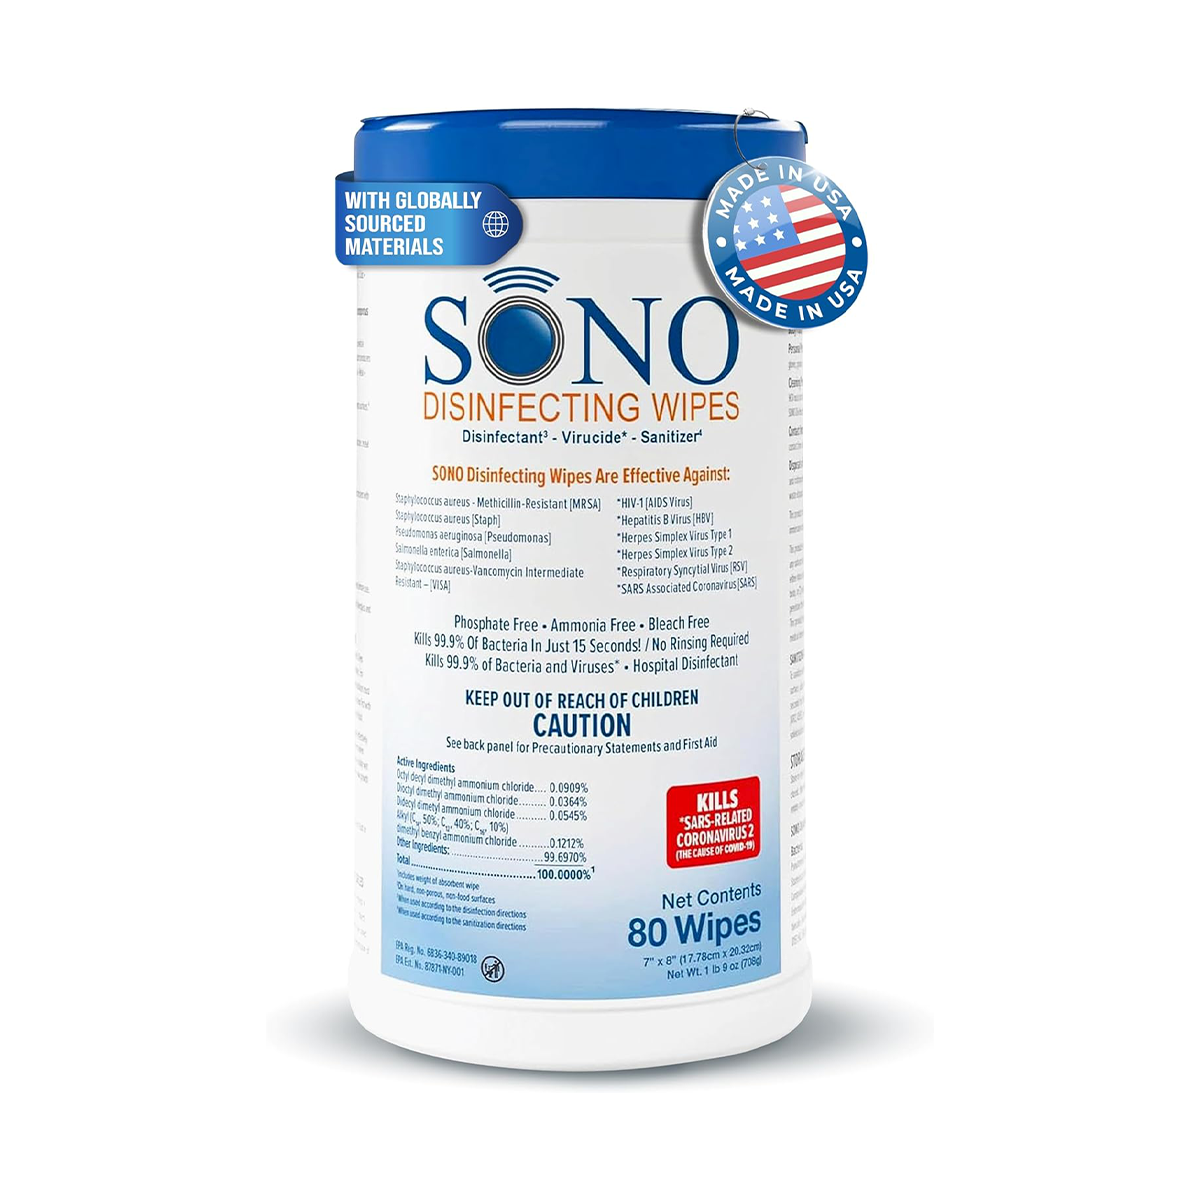 SONO Disinfecting Wipes Canister - Medical Grade Wipes for Effective Surface Sanitization